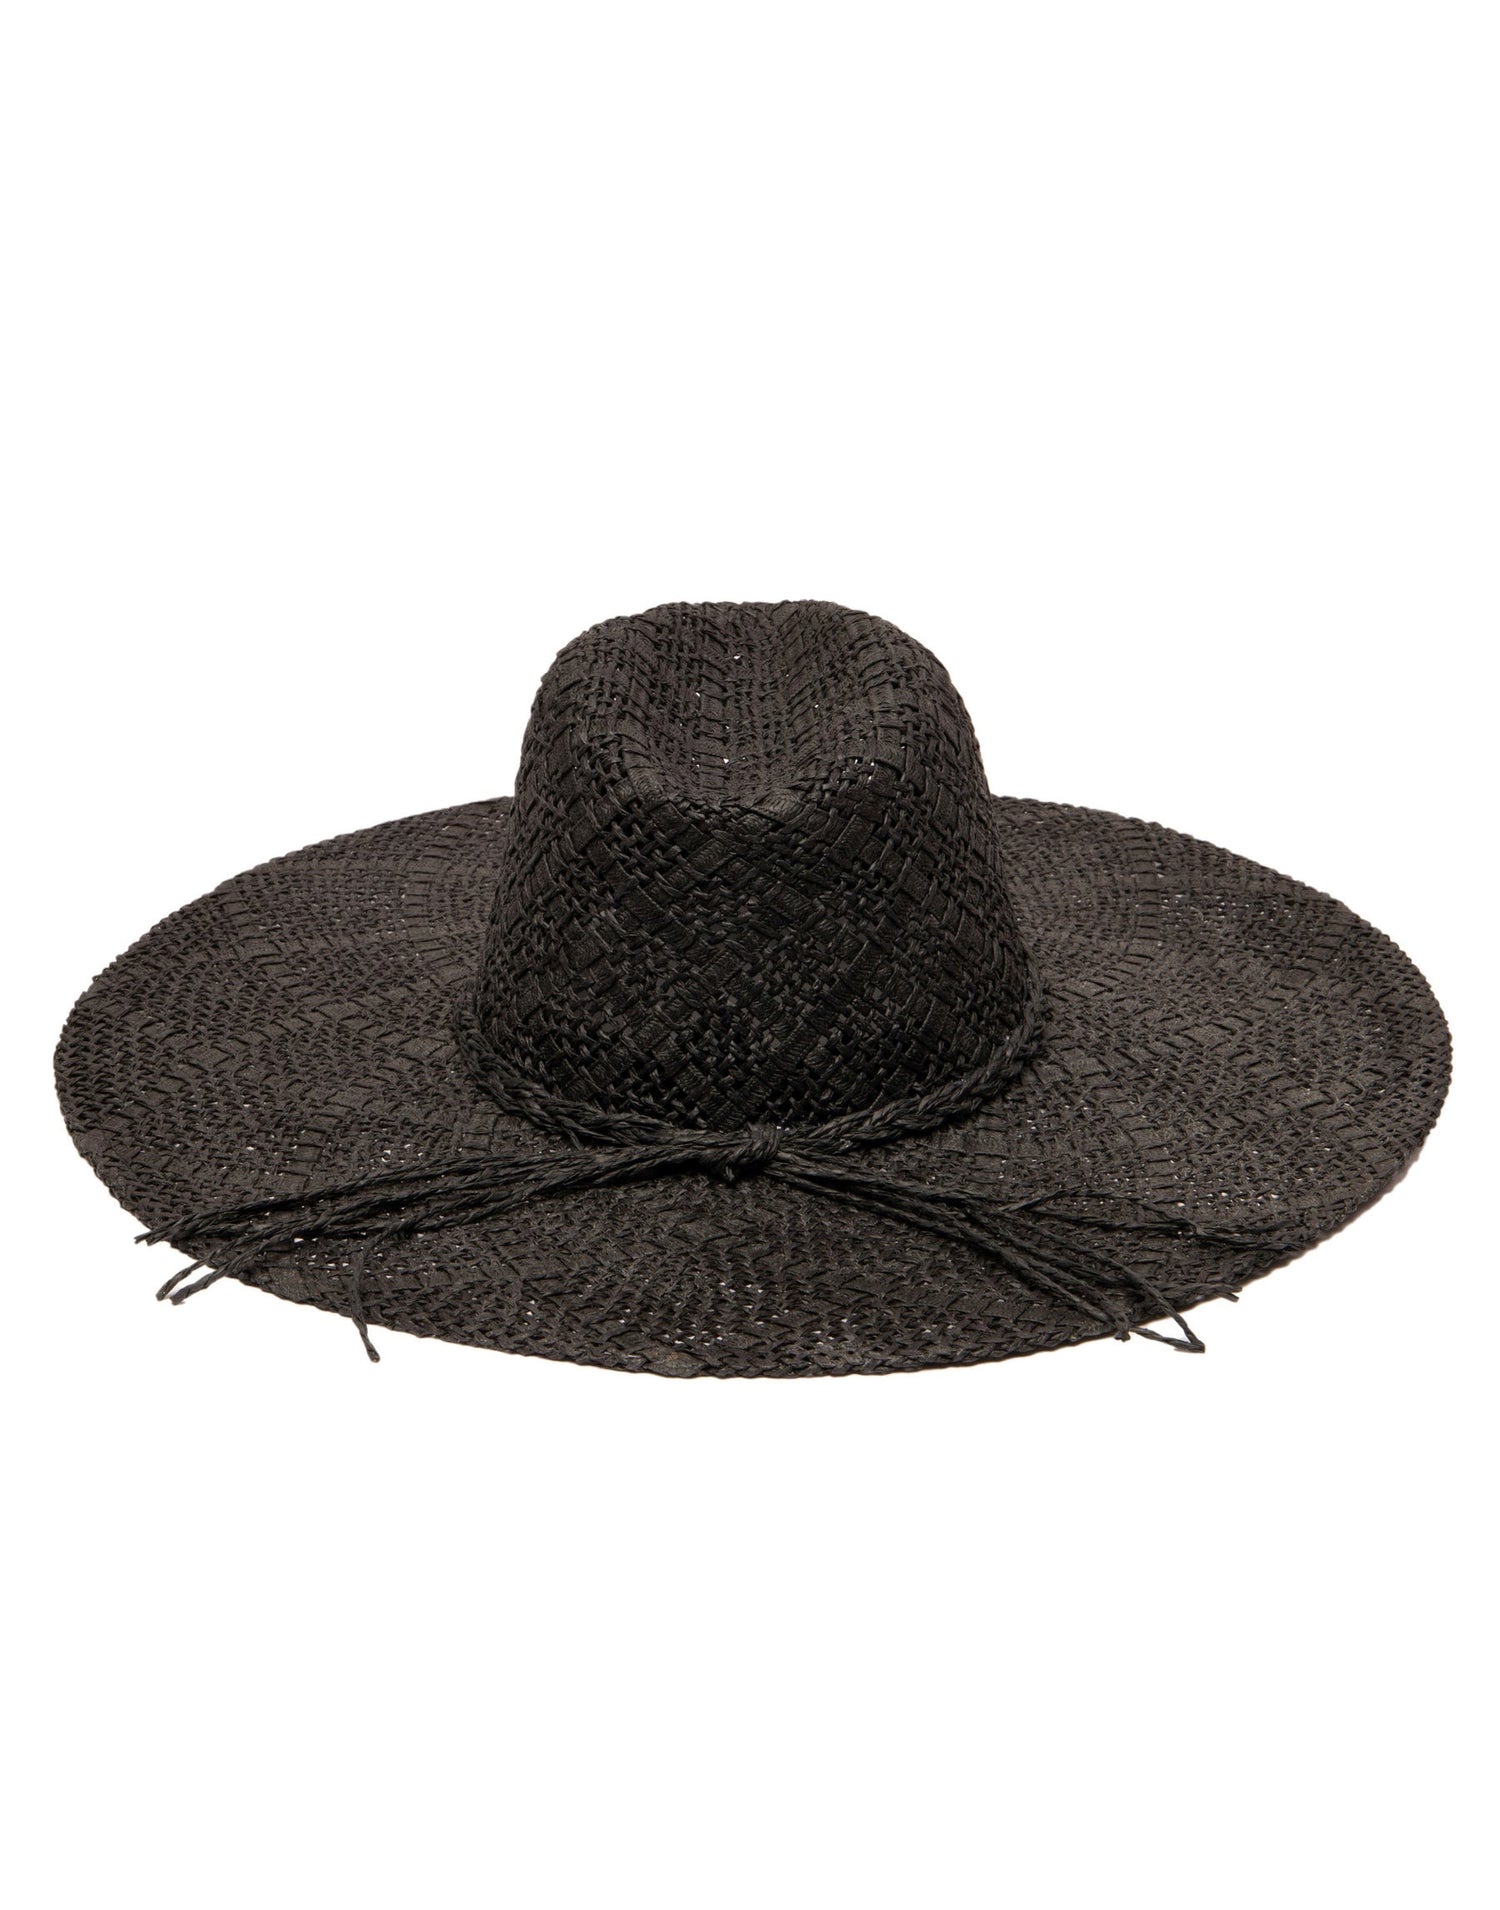 Sun Dialed Fedora by San Diego Hat Company in Black - Back View